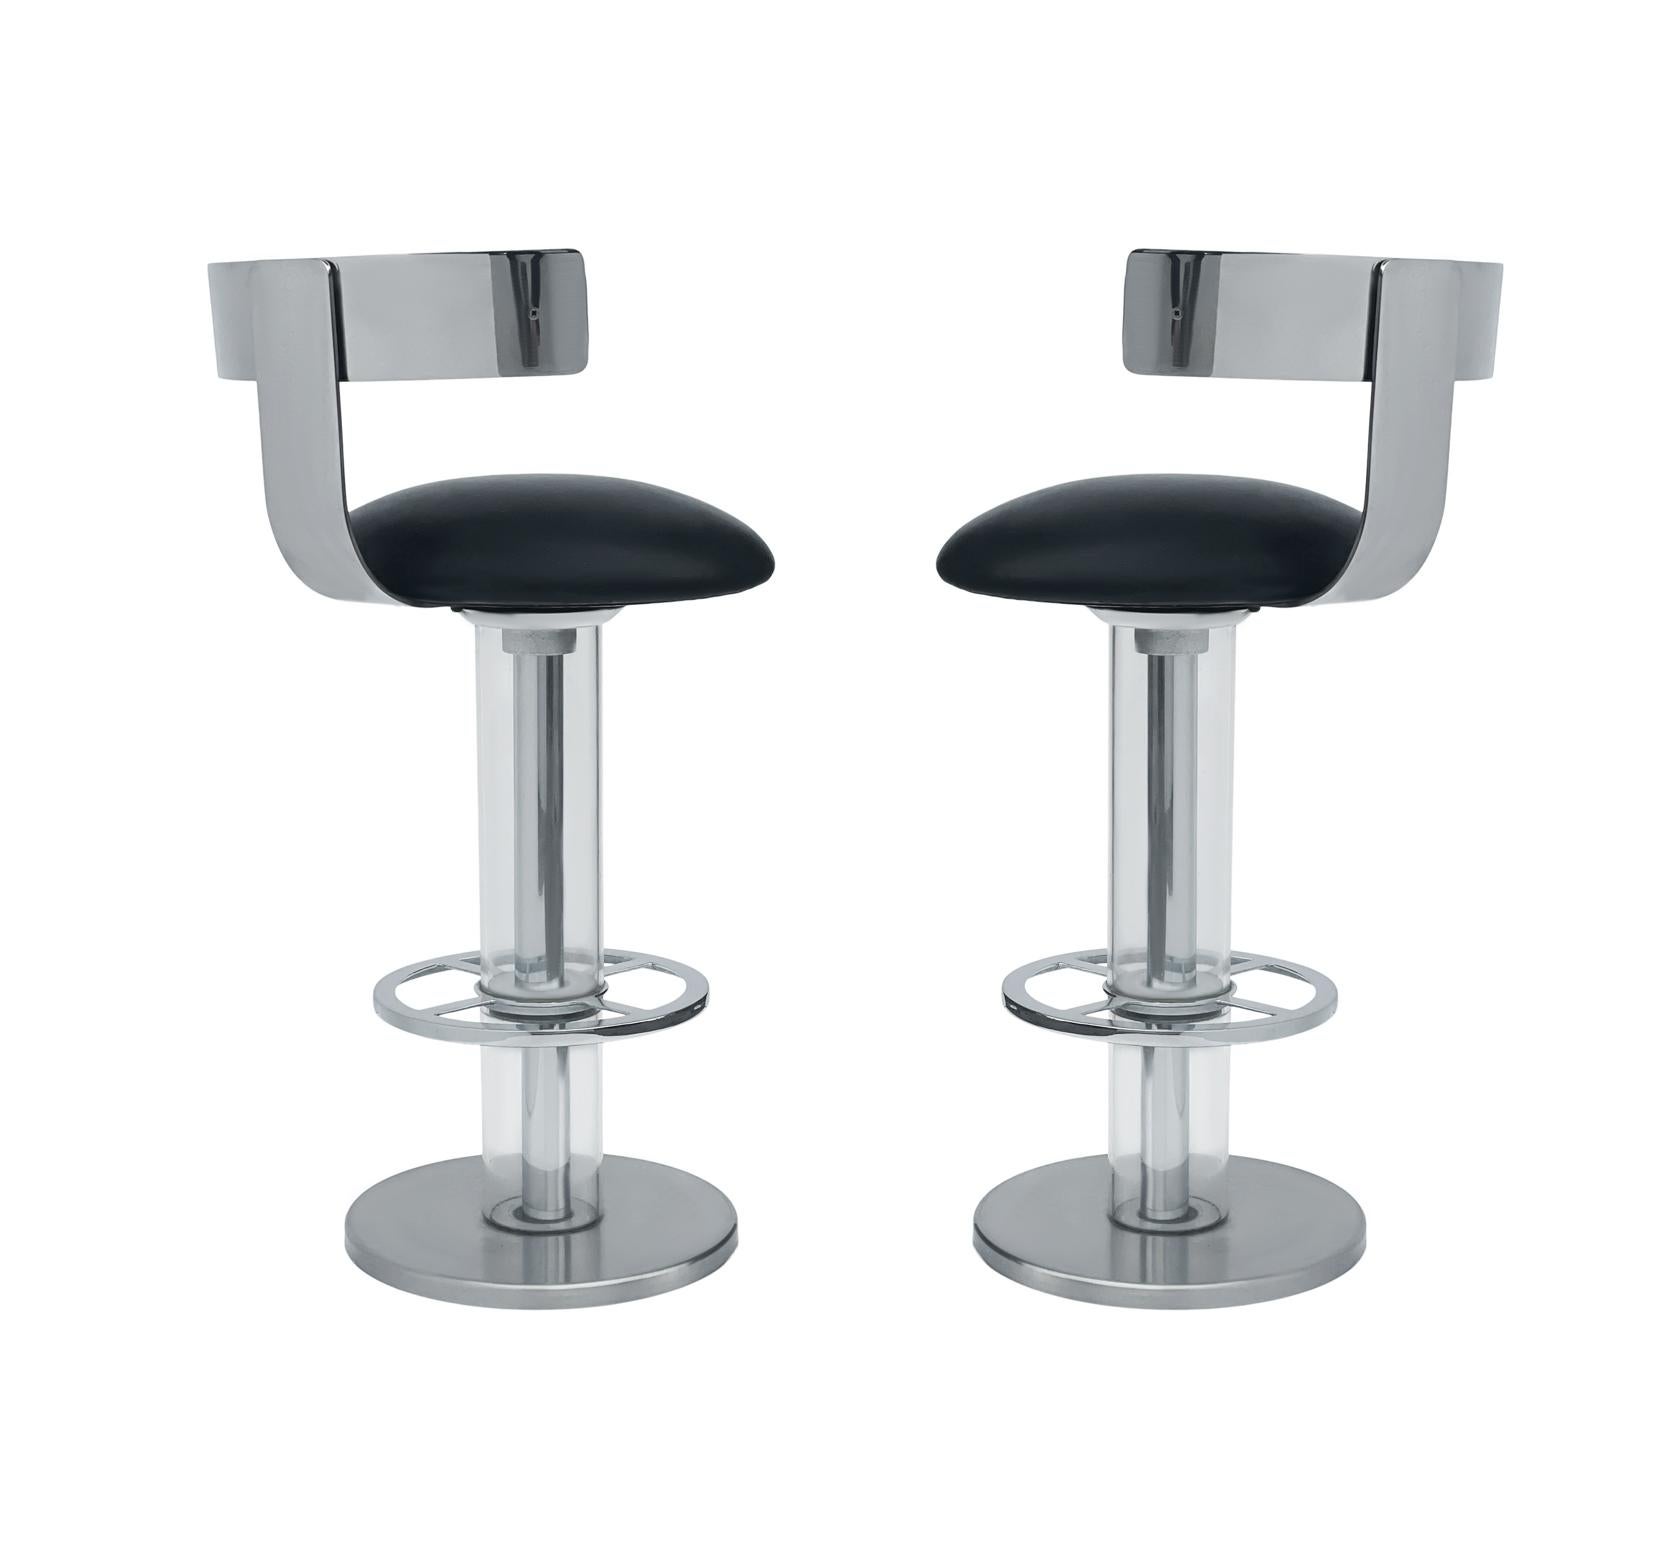 A well made matching pair of stools made by Design for Leisure circa 1980's. These feature heavy stainless steel construction with clear acrylic. Leather seat have some moderate wear and could use recovering.